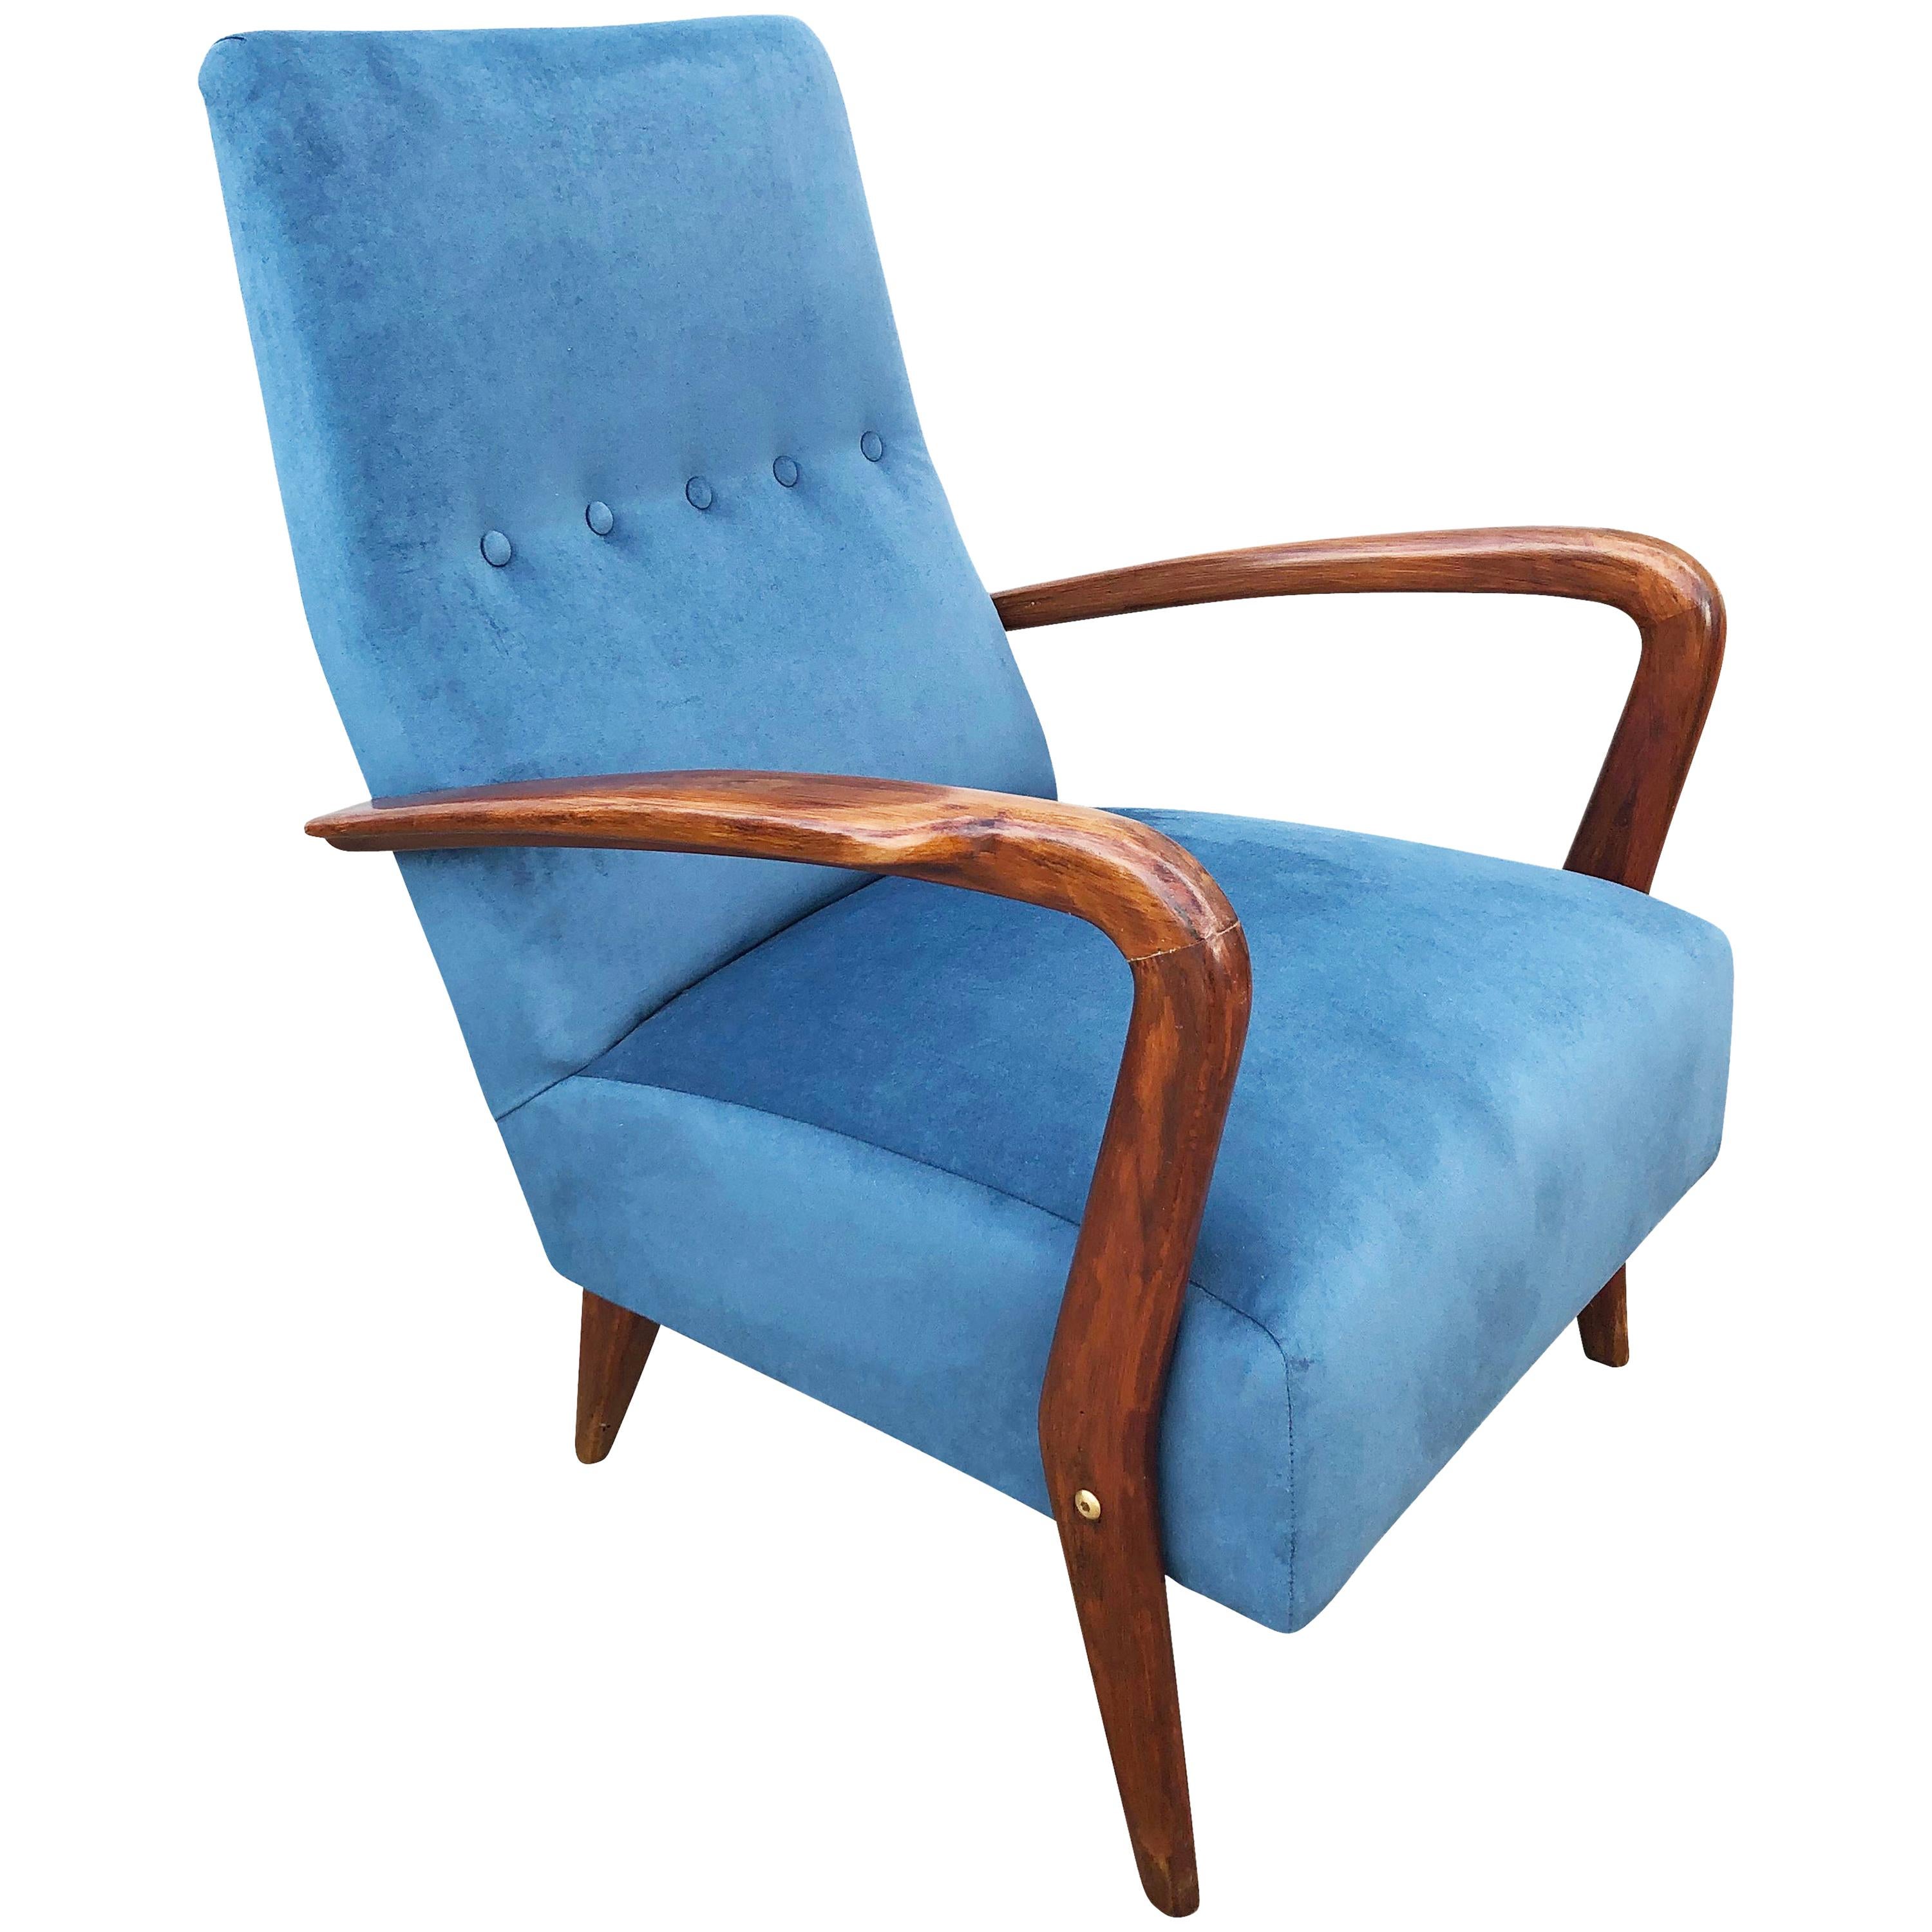 Italian Midcentury Armchair in the Manner of Gio Ponti